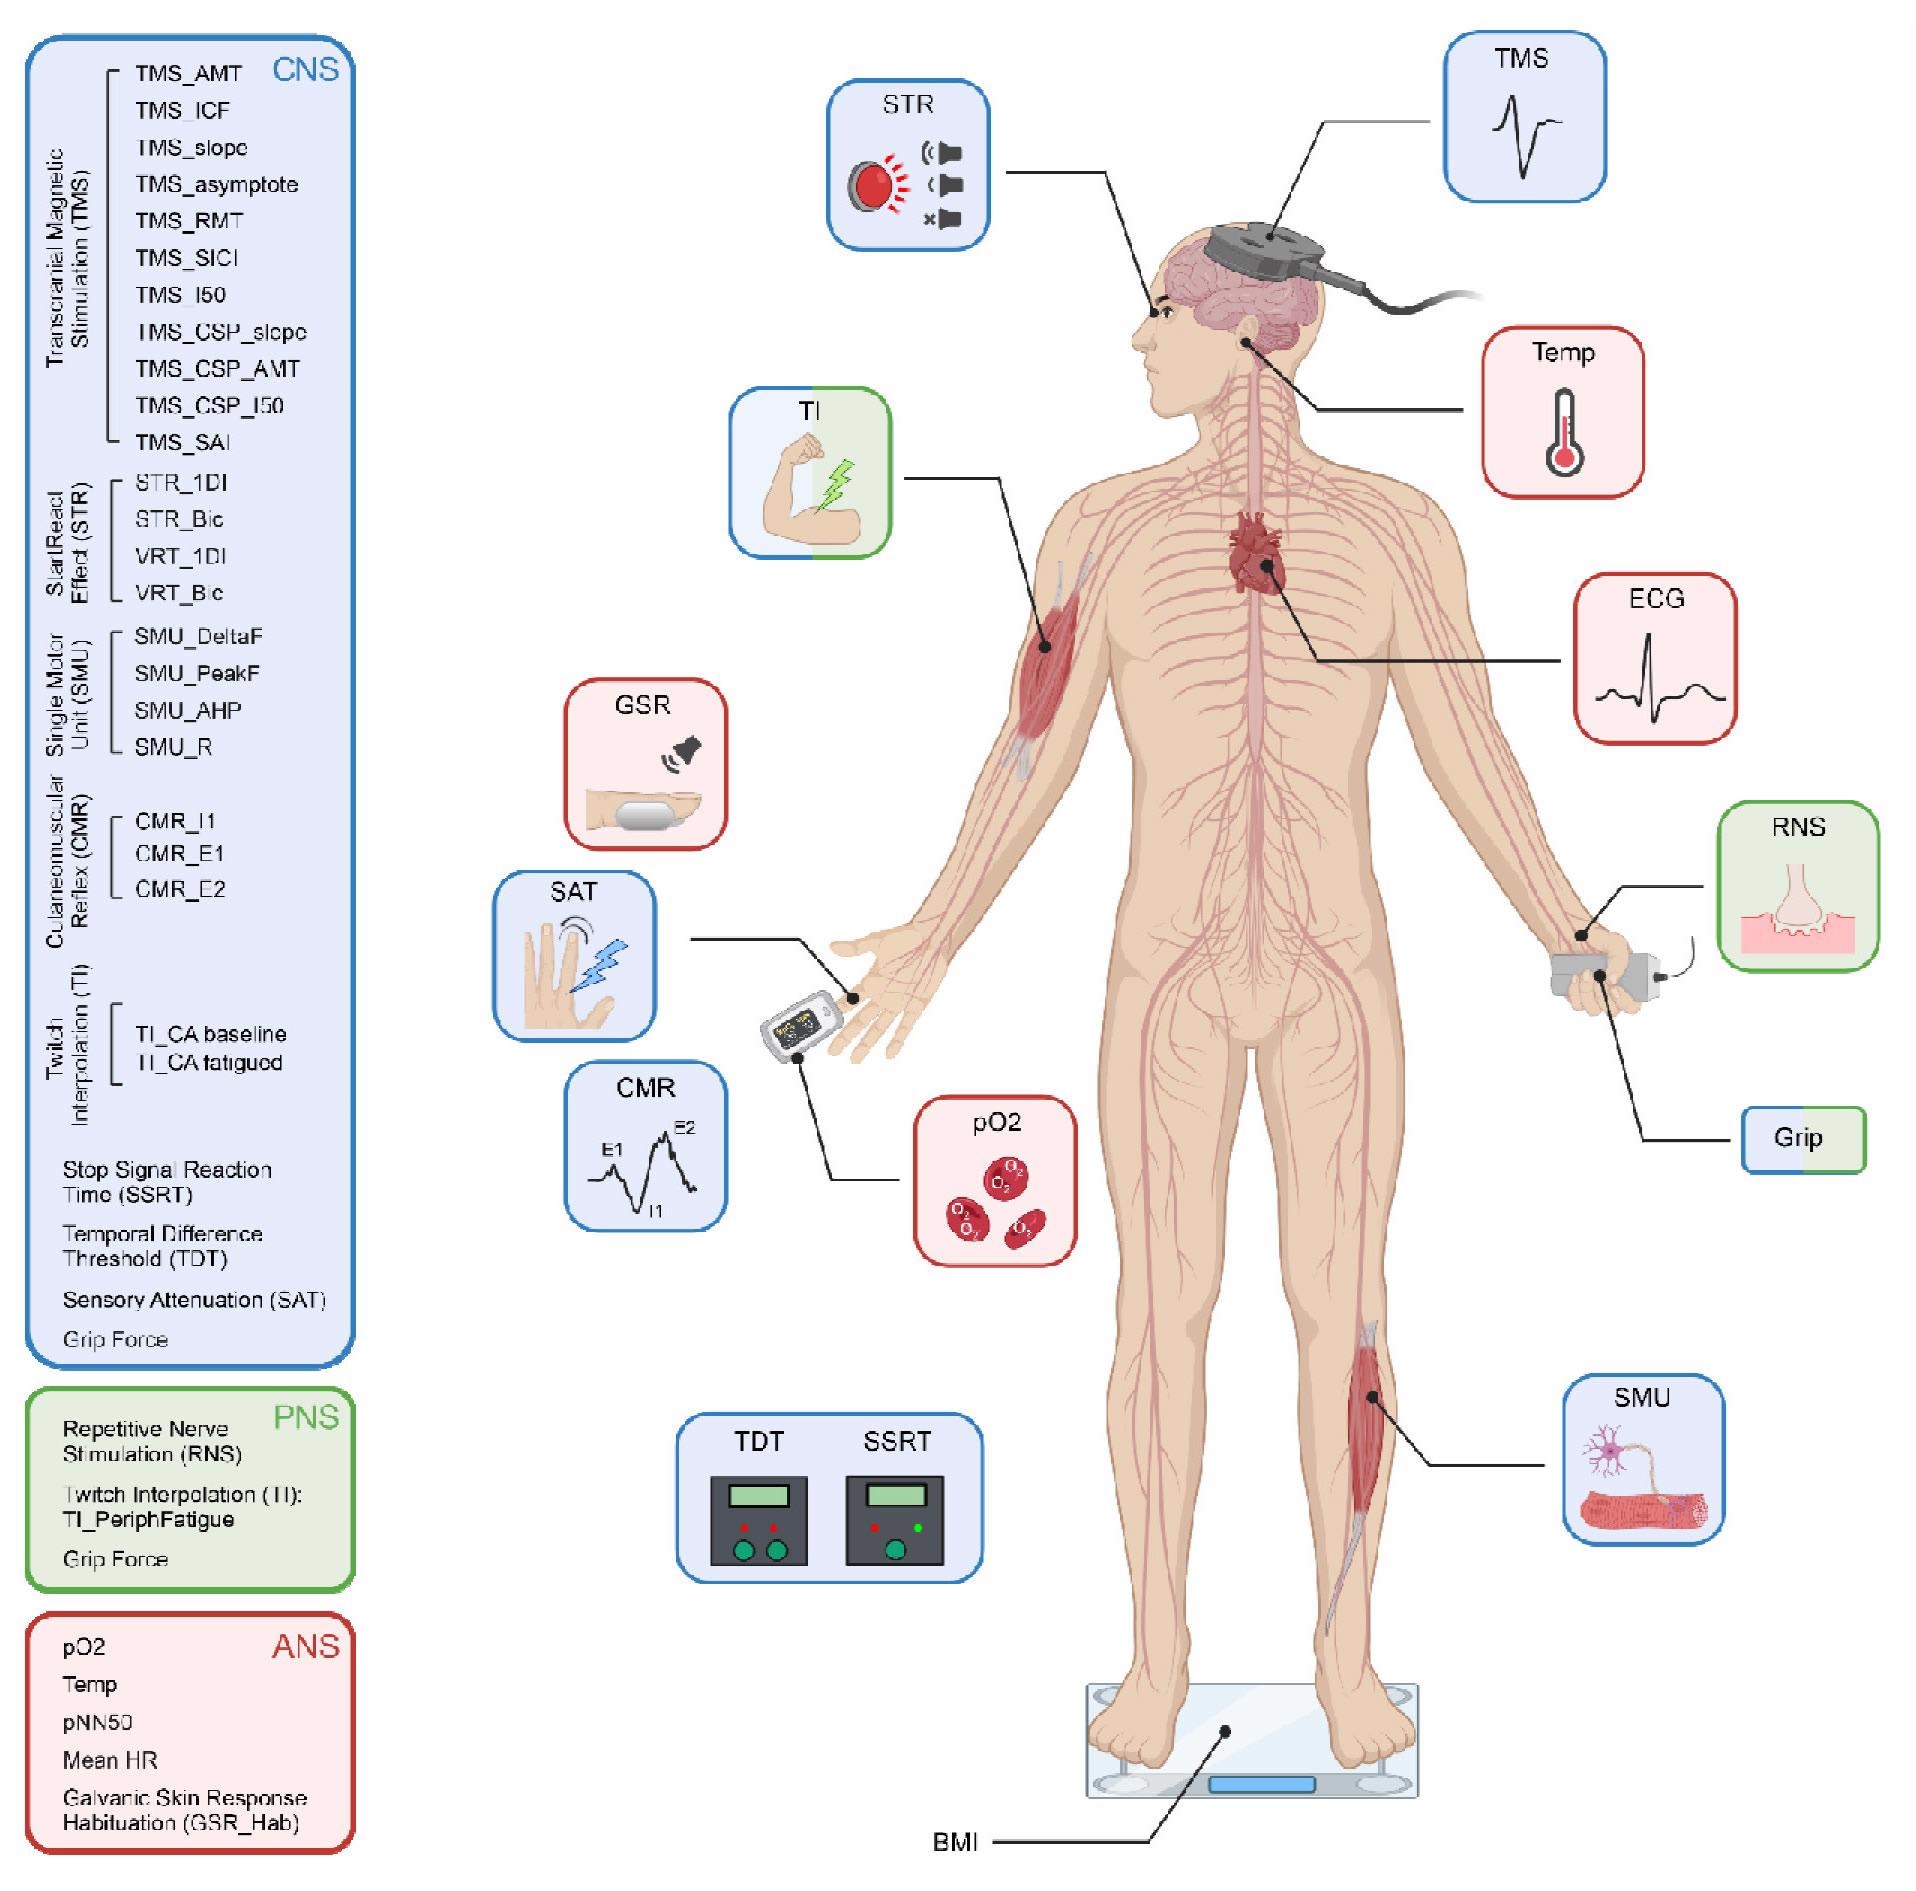 Schematic representation of the various tests performed, color coded according to which components of the central, peripheral and autonomic nervous system (CNS, PNS, ANS) they assessed.  TMS, transcranial magnetic stimulation;  ECG, electrocardiogram;  RNA, repeated nerve stimulation;  SMU; single motor device recording;  BMI, body mass index;  TDT, time difference threshold;  SSRT, stop signal response time;  pO2, oxygen saturation in the blood;  CMR, cutaneous muscular reflex;  SAT, sensory attenuation with motion;  GSR, habituation to the galvanic skin reaction to loud sound;  TI, twitch interpolation, STR, StartReact effect.